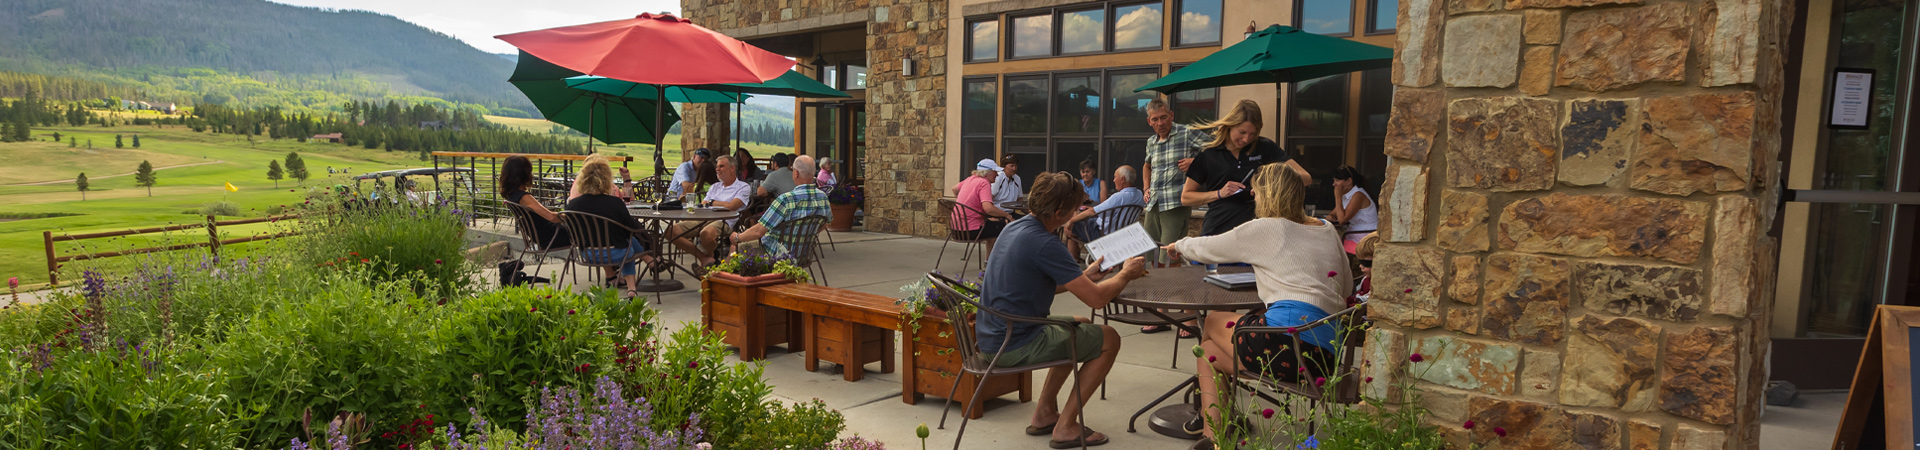 Guests enjoy al fresco dining at Bistro 28, the restaurant of Pole Creek Golf Club, with a panoramic view of the golf course in the background.